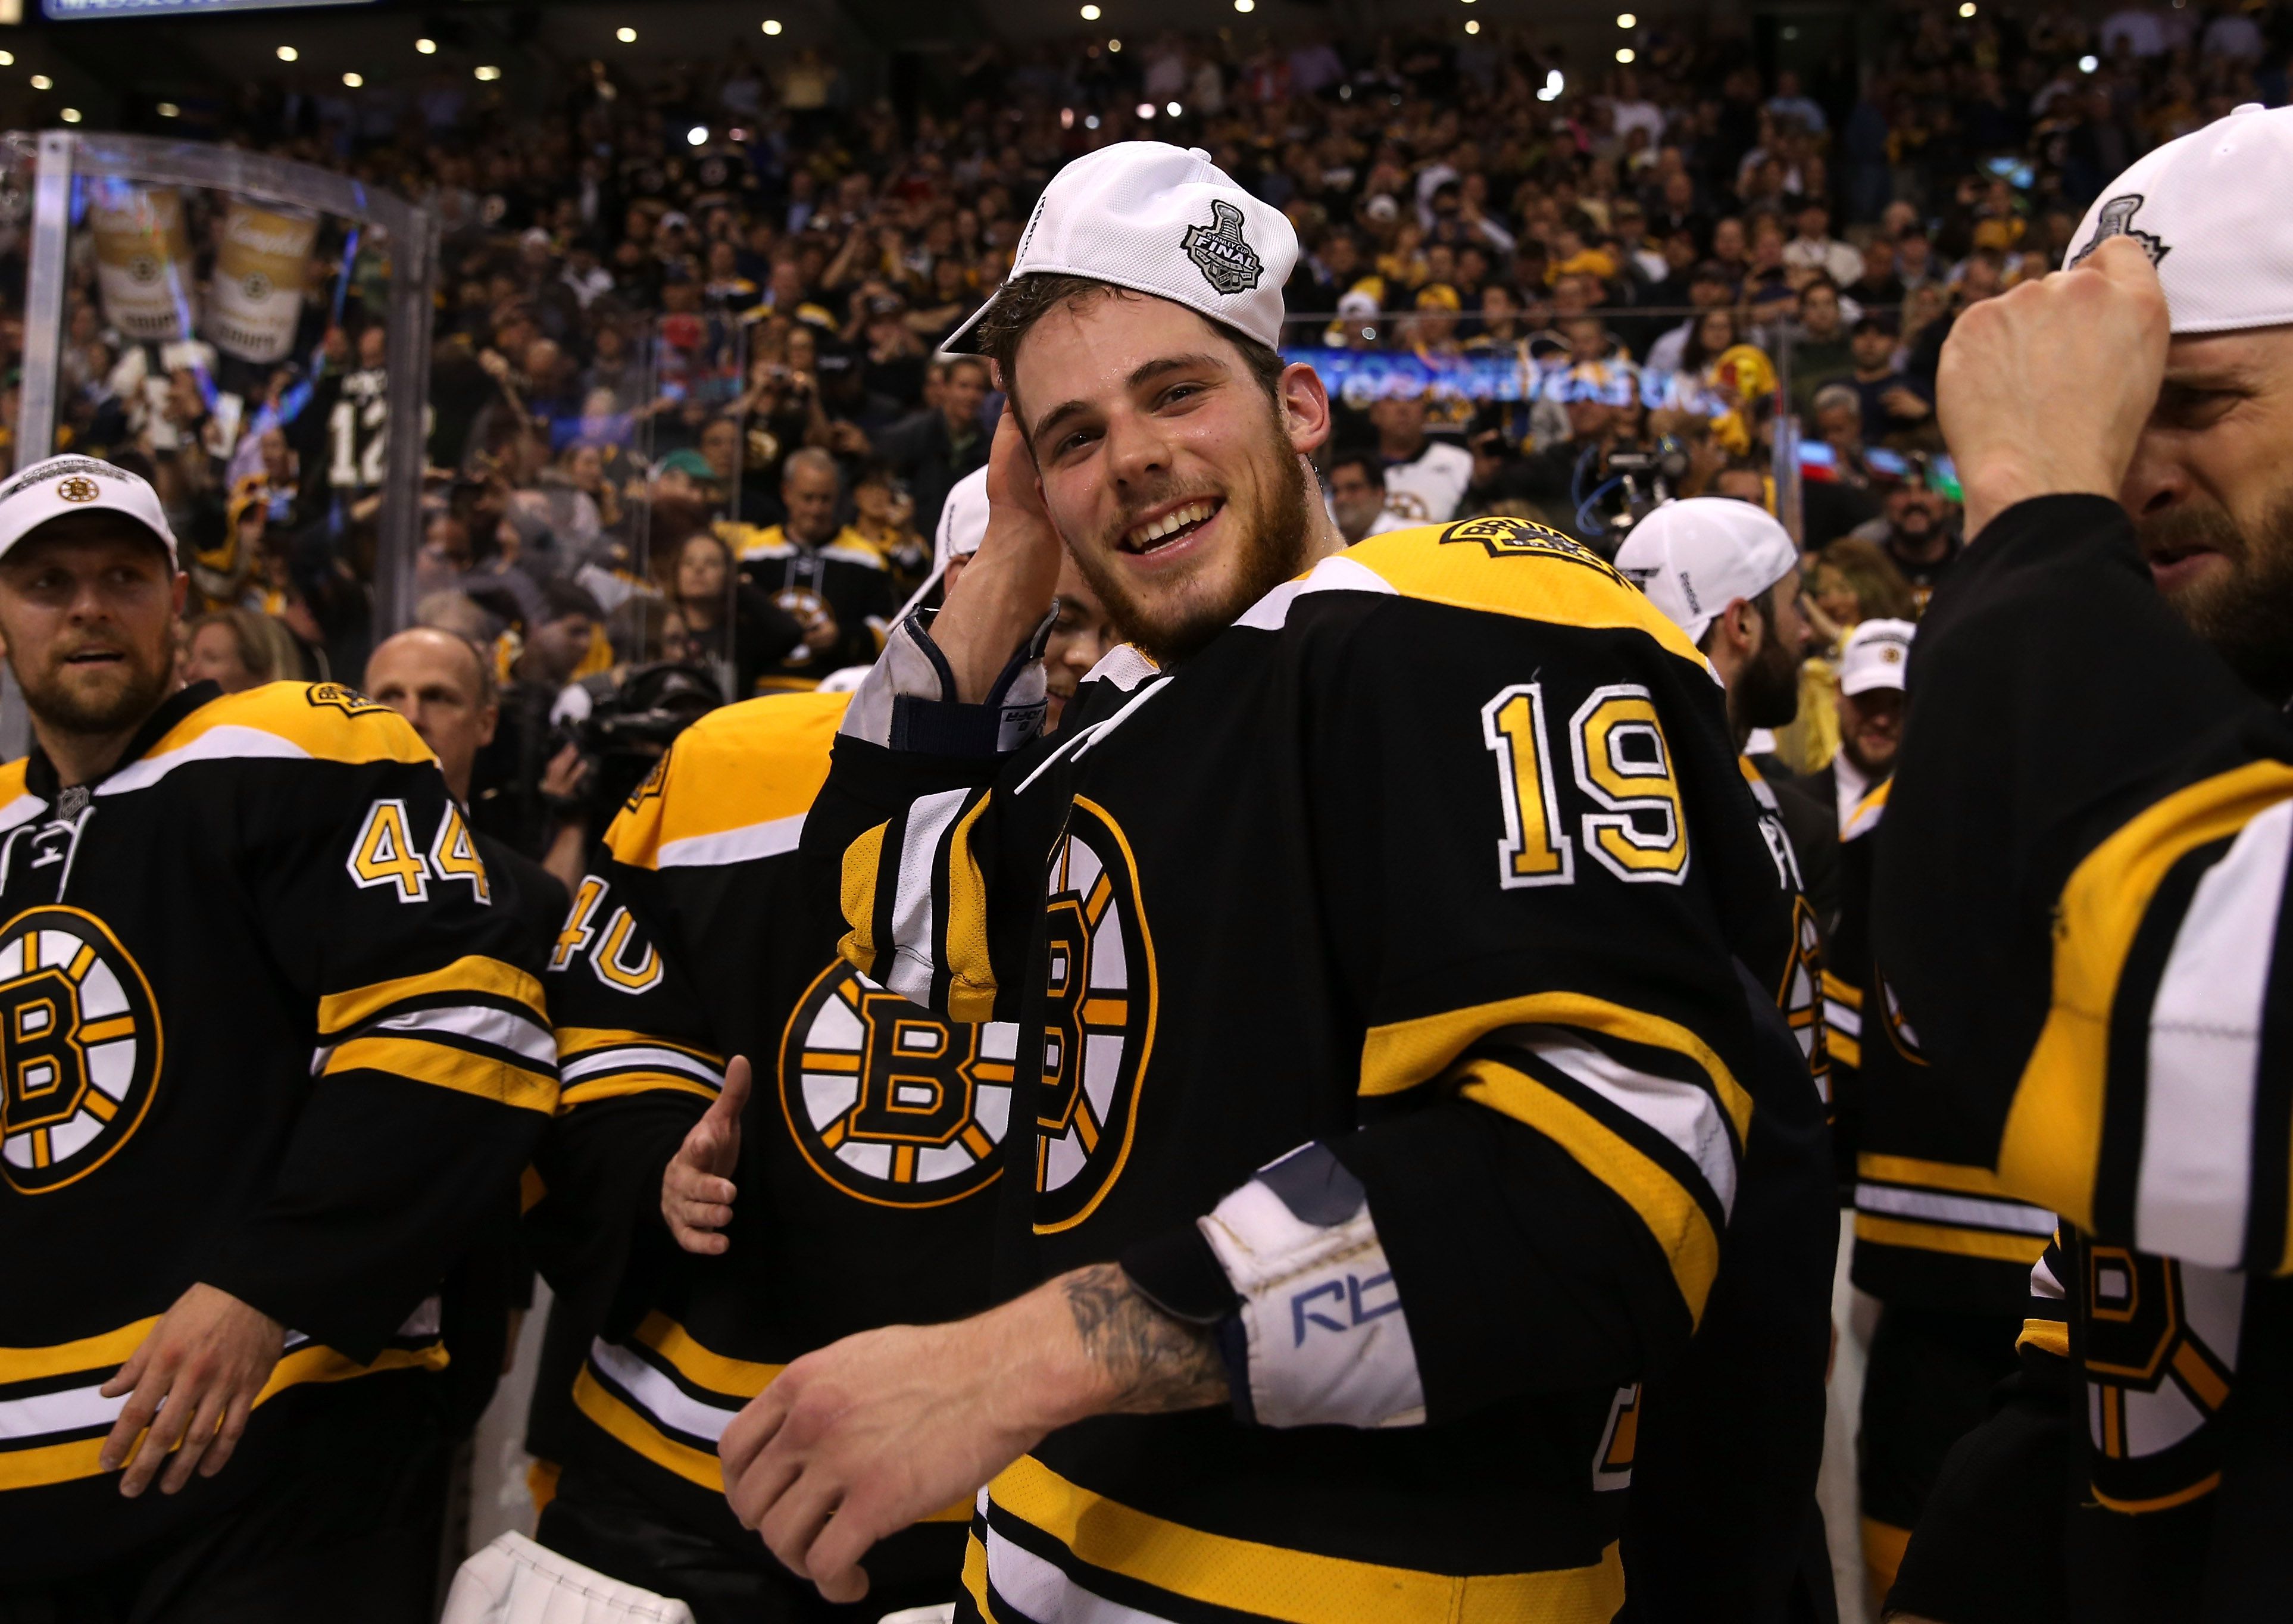 Heika: Tyler Seguin Rich Peverley to Bruins for Stars...seriously